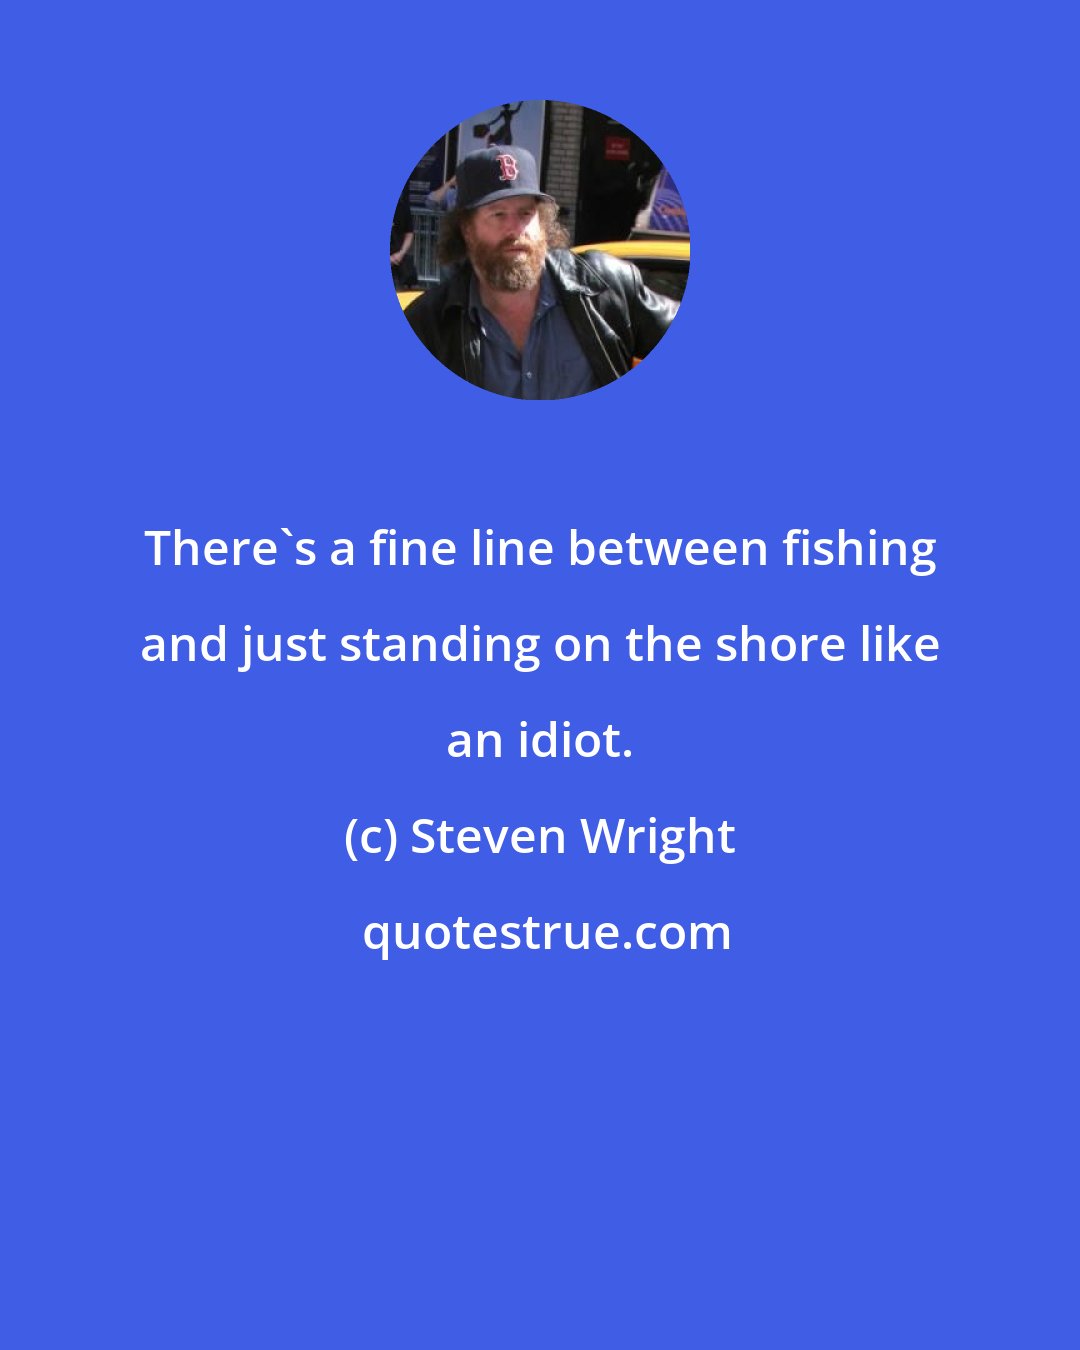 Steven Wright: There's a fine line between fishing and just standing on the shore like an idiot.